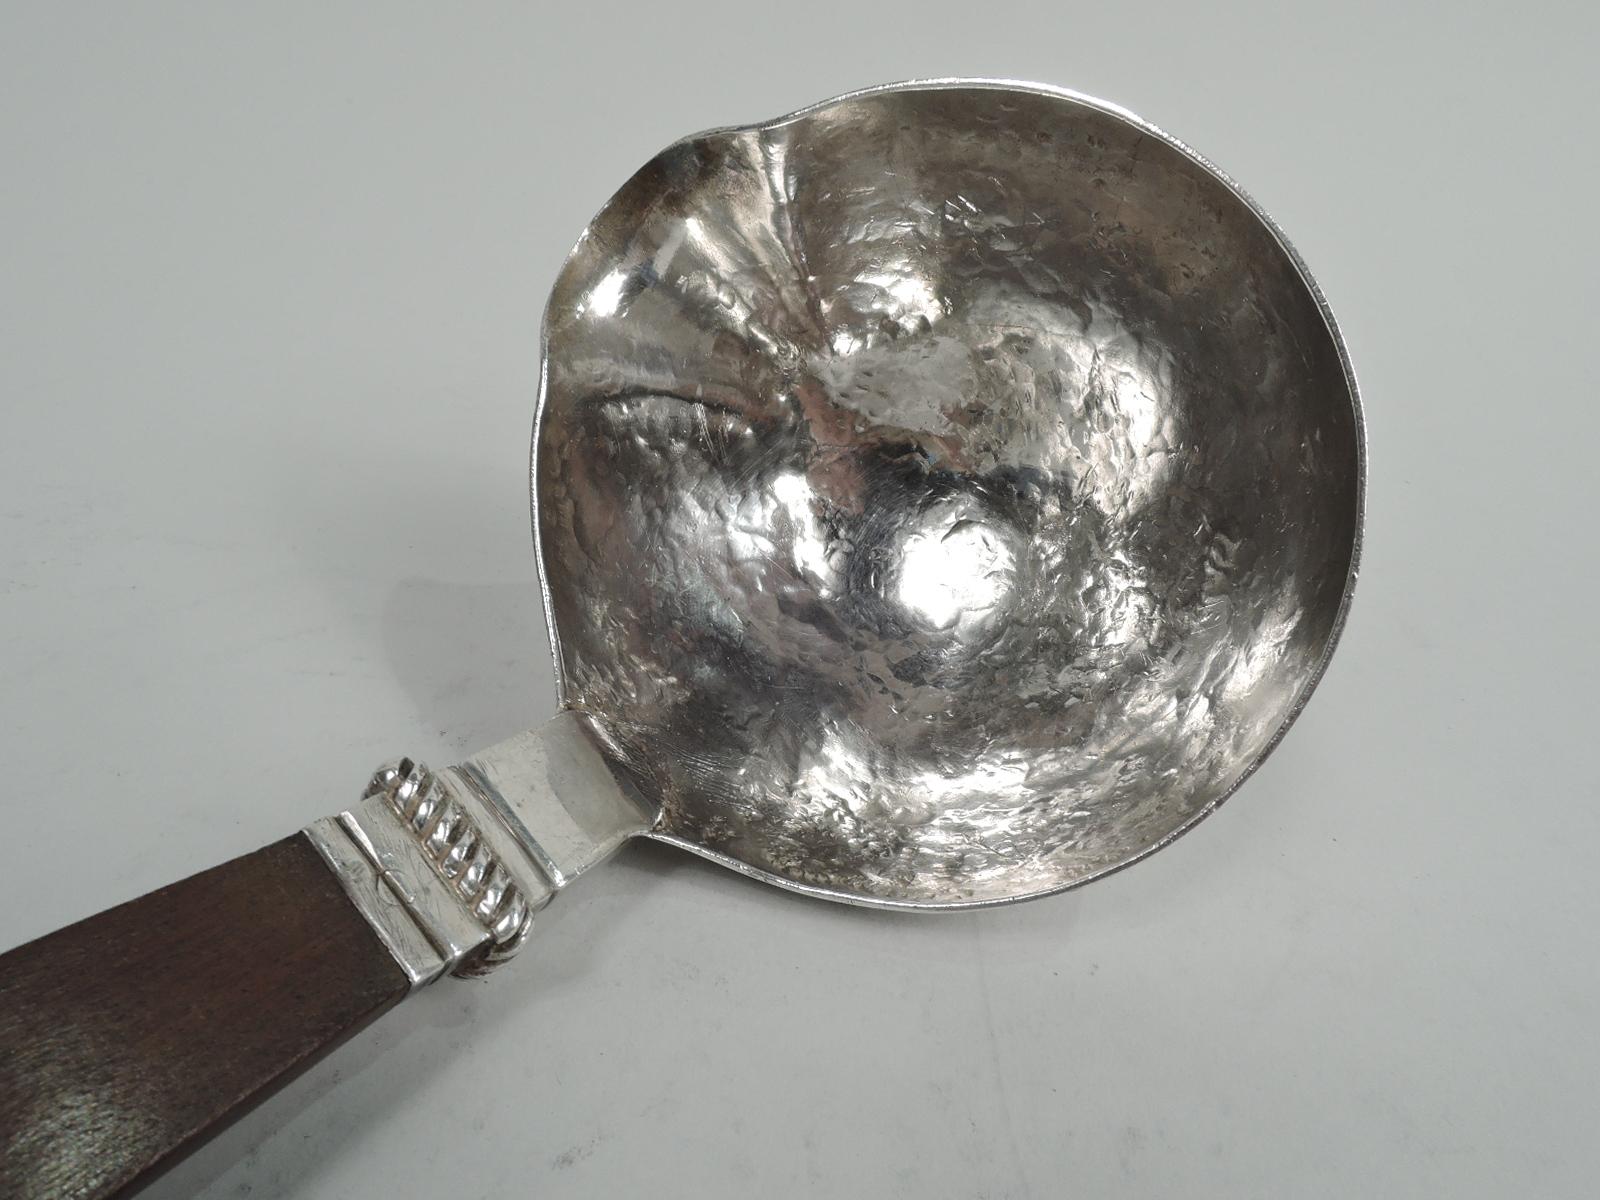 Rare sterling silver punch ladle. Made by Spratling in Taxco, Mexico. Round hand-hammered bowl with curved spout. Mount has tooled bands and applied rope band and is inset with tapering stained-wood handle. An early piece by this maker. 1940s marks.